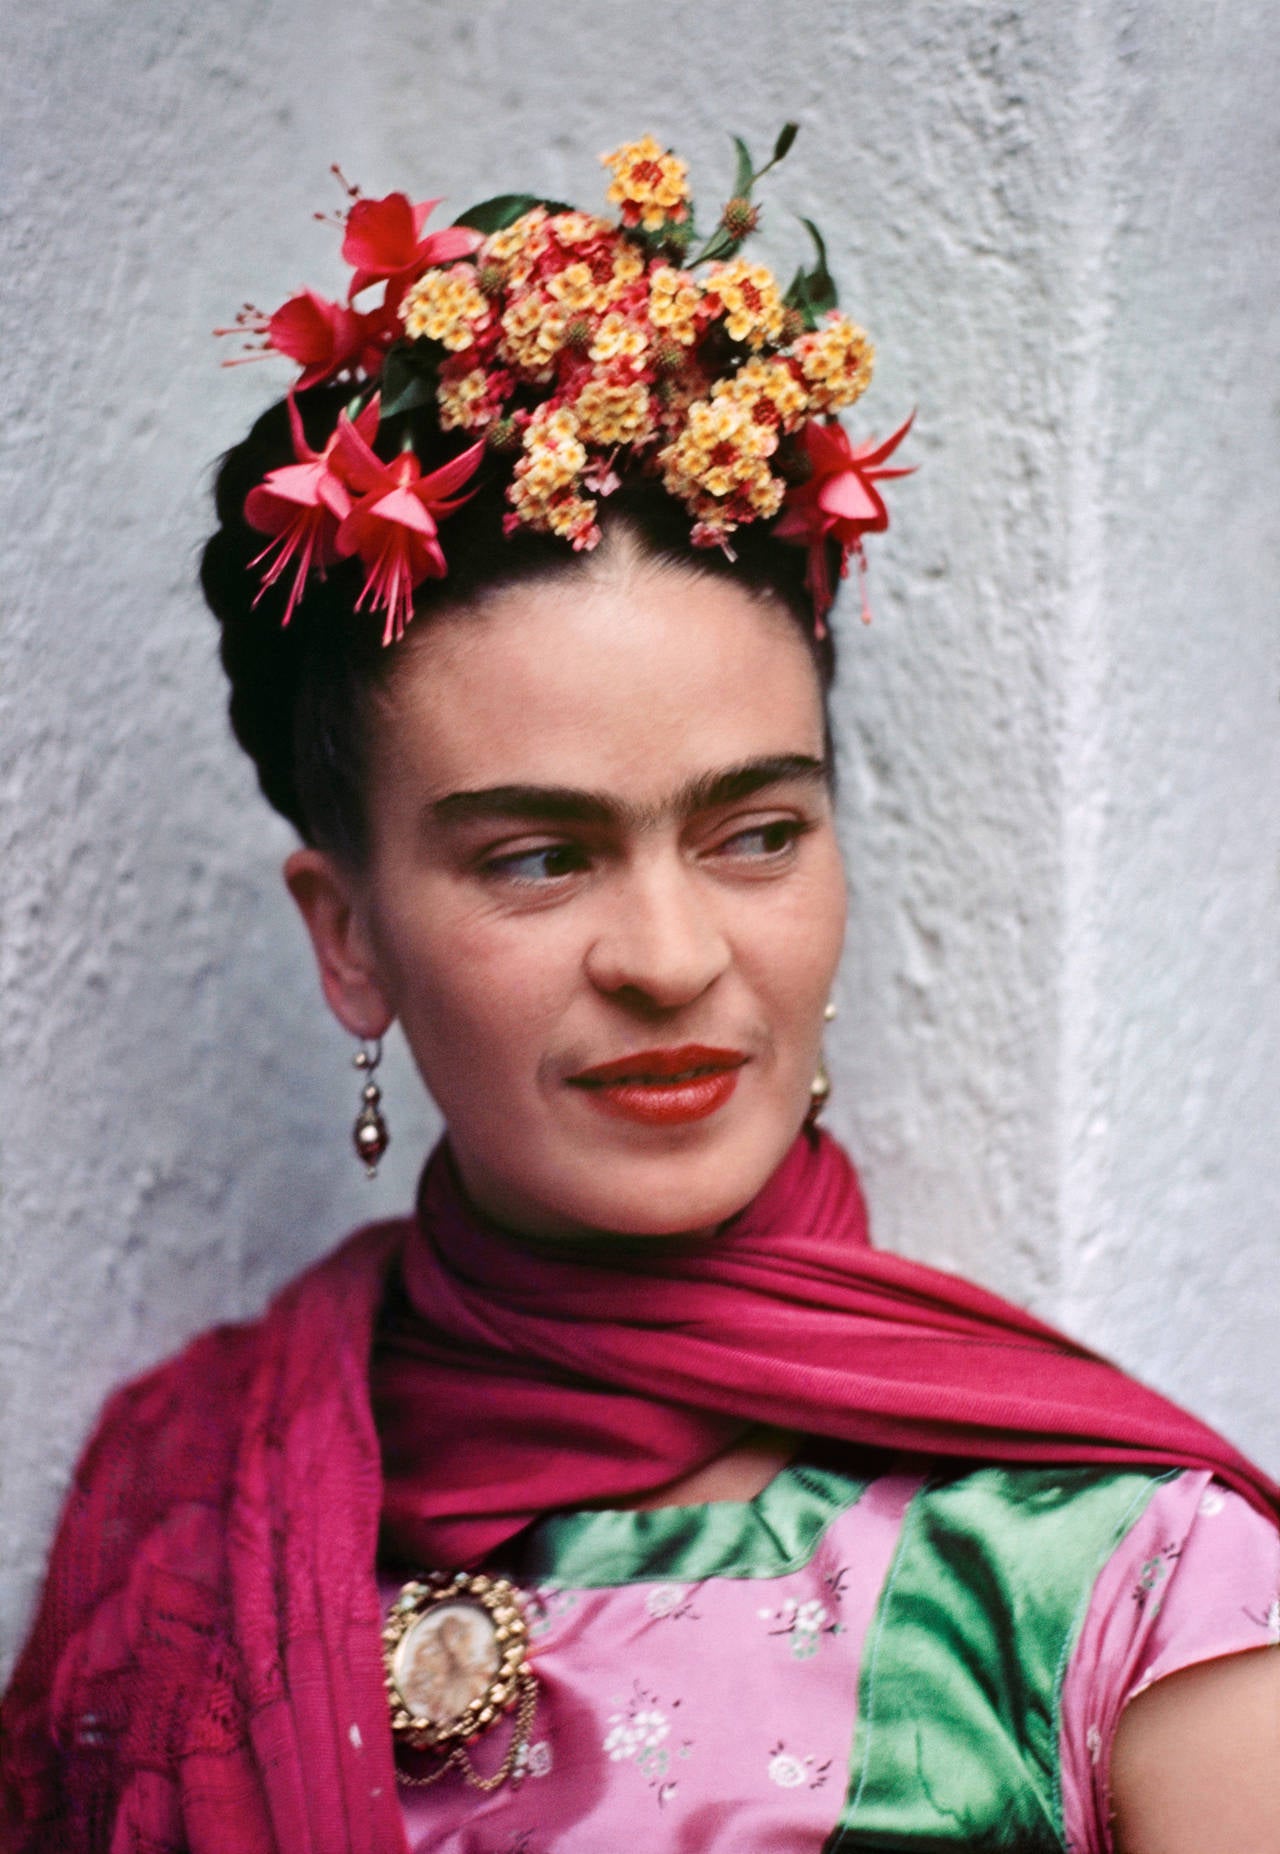 Frida in Pink and Green Blouse by Nickolas Muray, 1938, Carbon Pigment Print